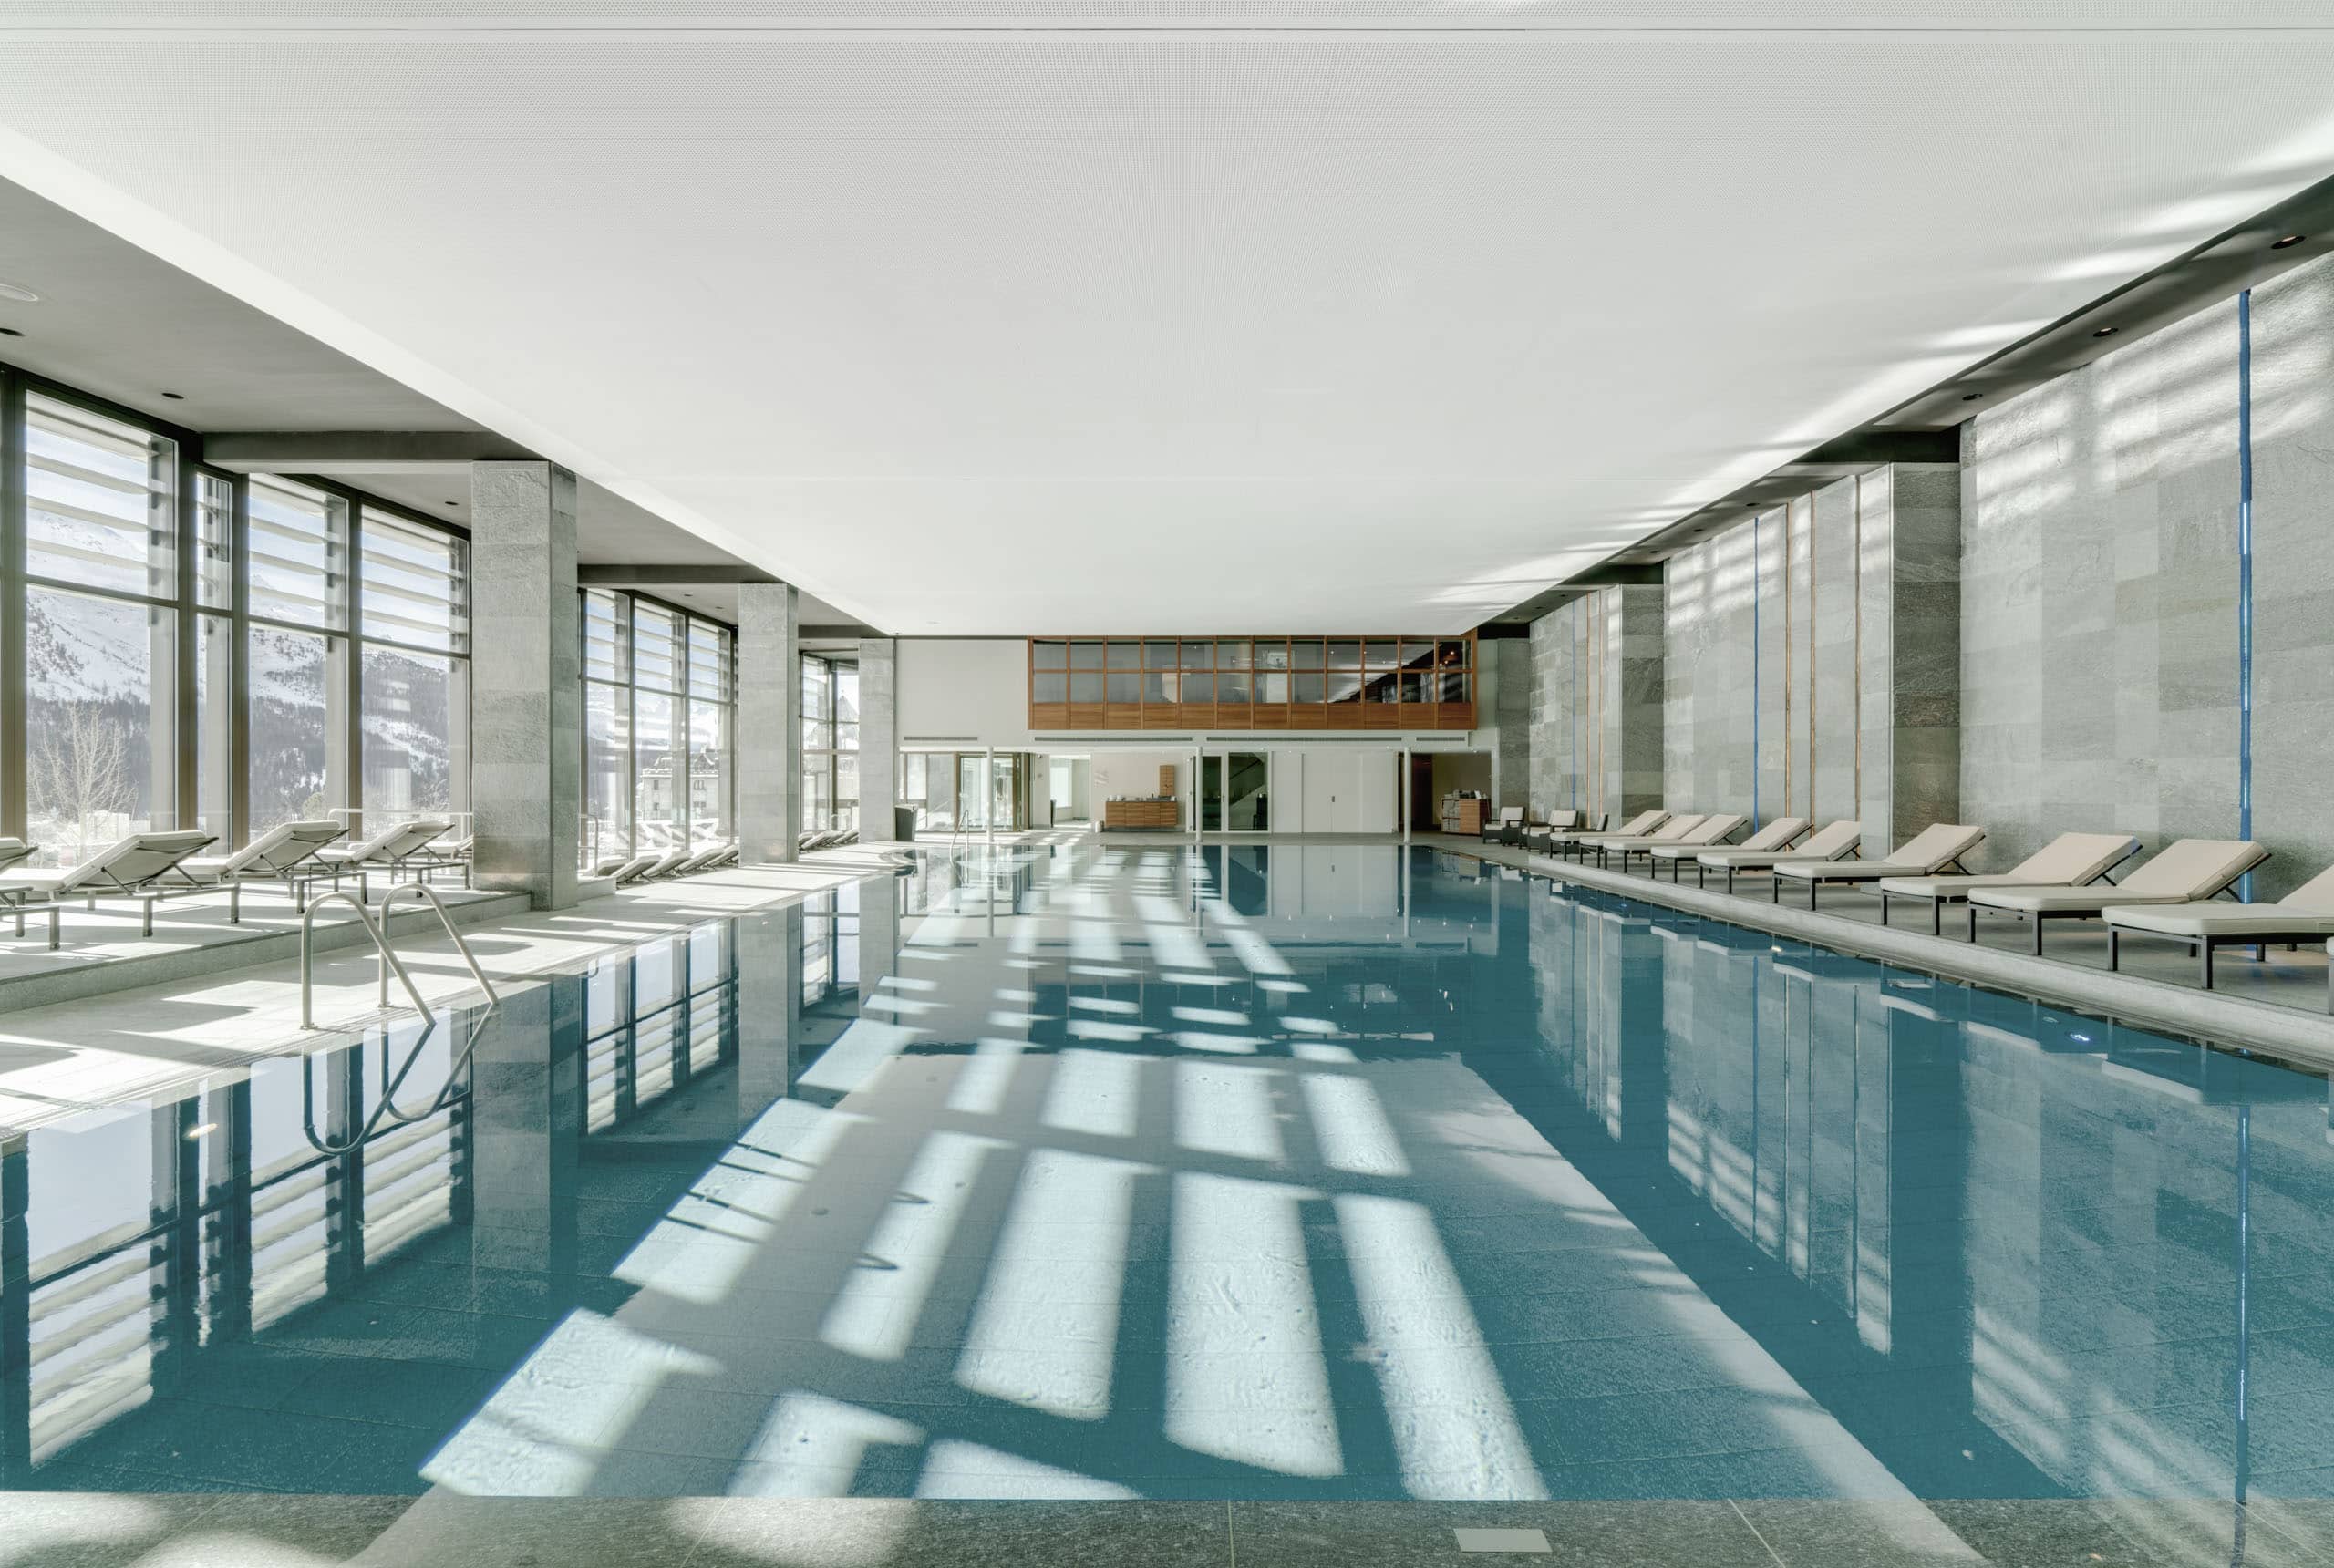 Swiss Deluxe Hotels Stories Winter 2020 The Call Of The Mountains 08 Kh Spa Indoor Pool Winter 2019 (2) Bearb Ecirgb